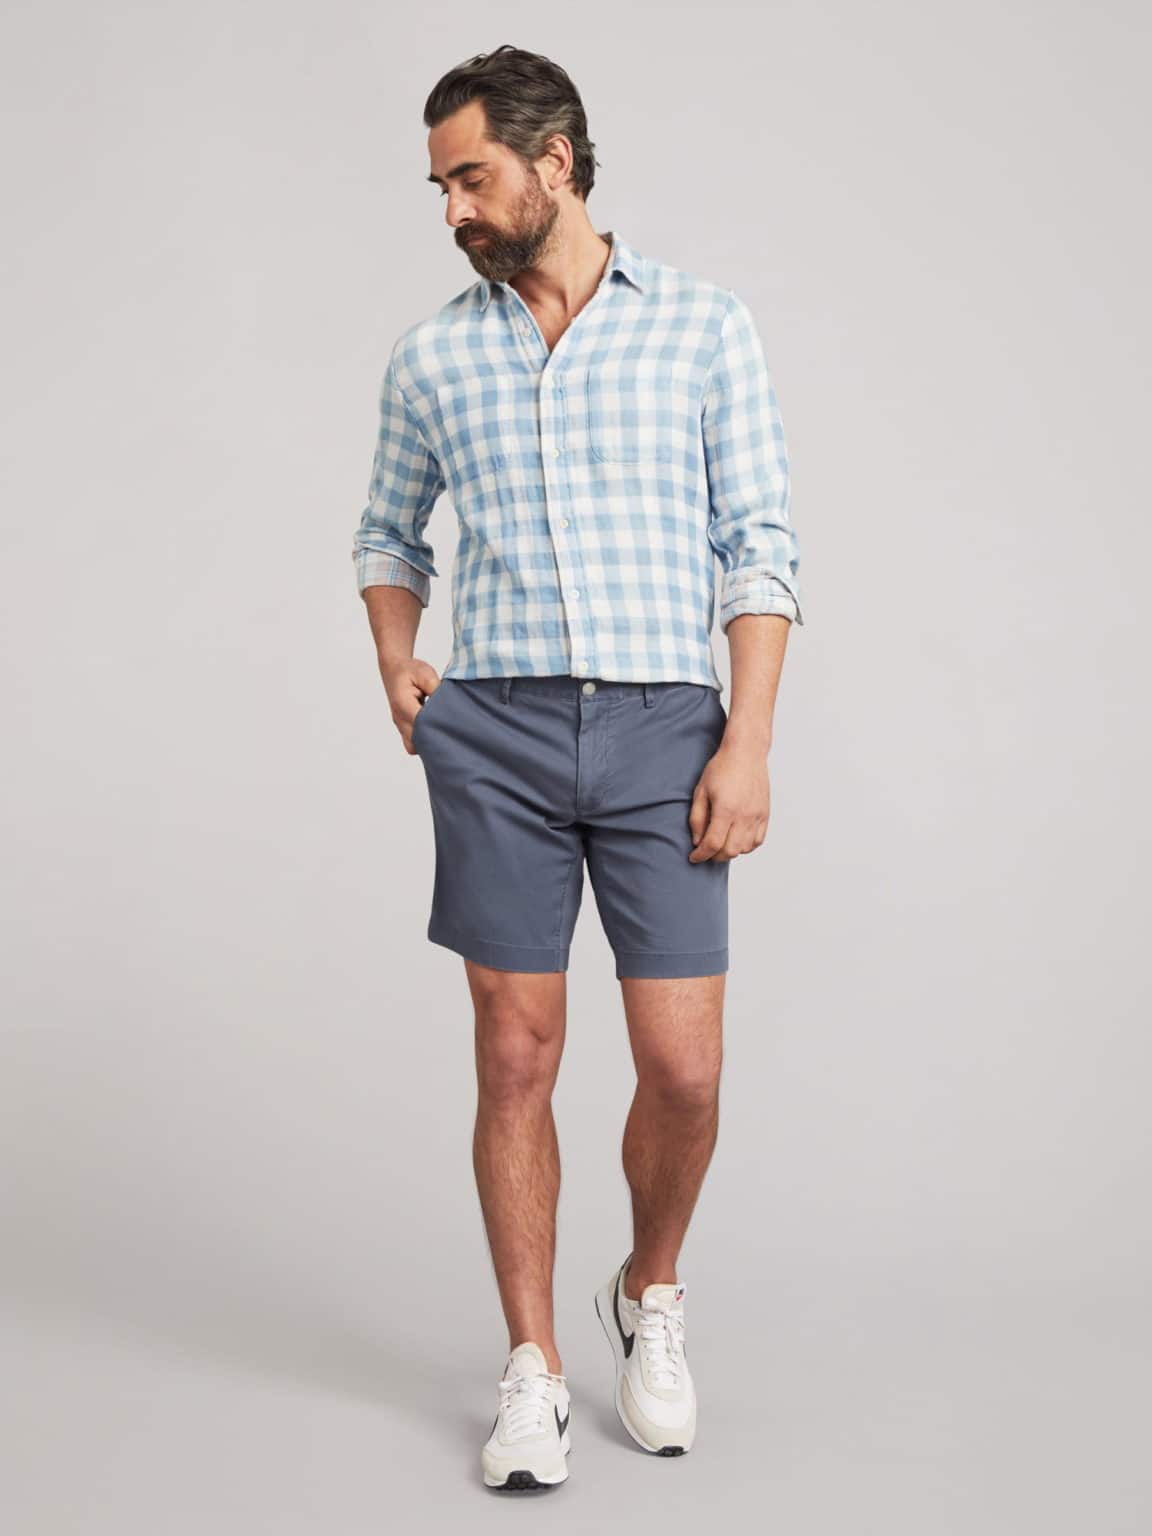 17 Best Preppy Clothing Brands for Guys (2023 Guide) - The Modest Man